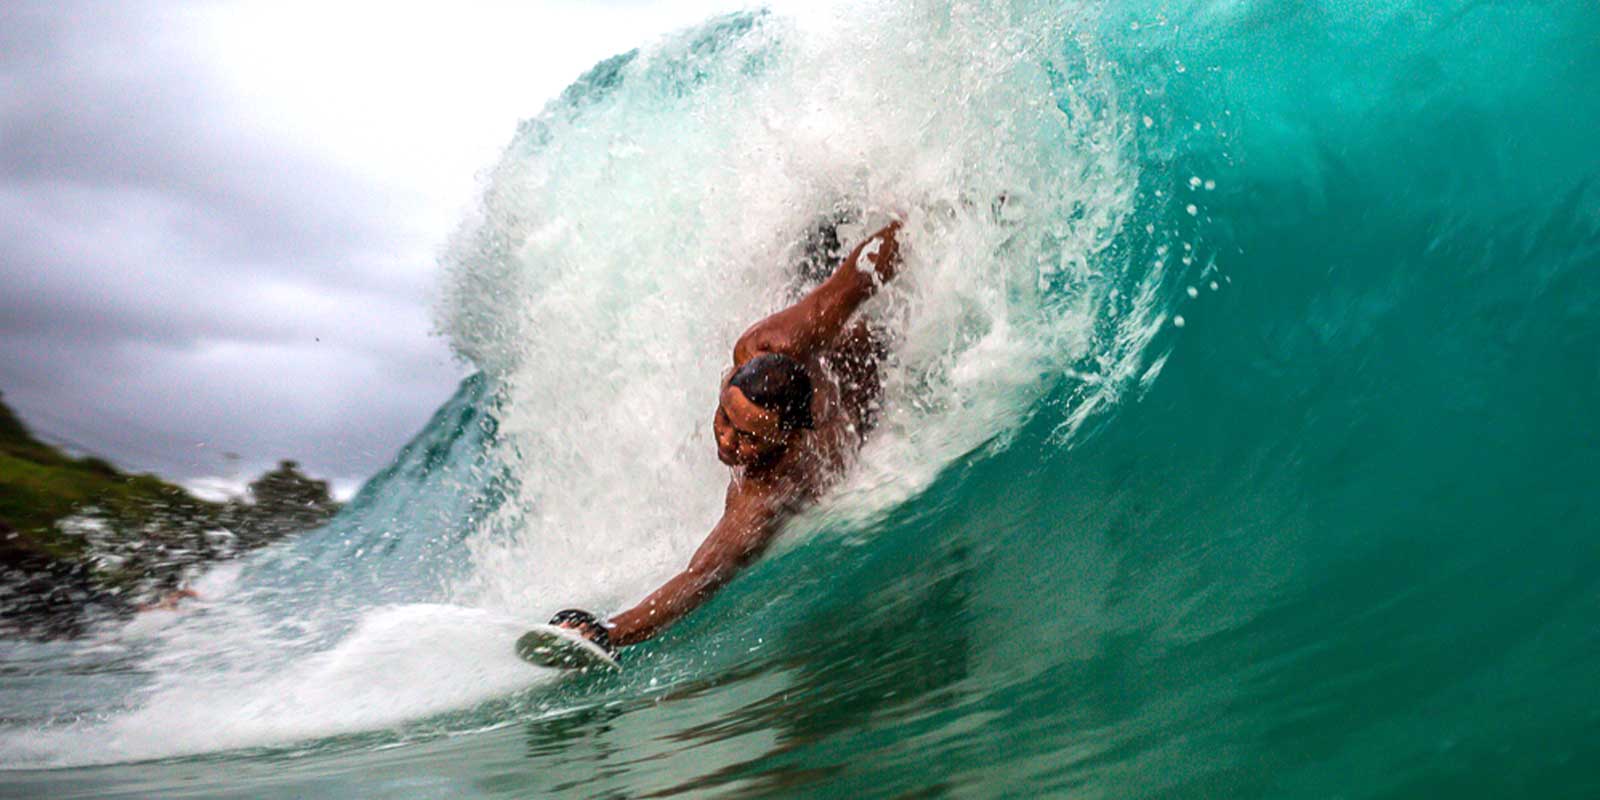 How Is Surfing Good For Student's Mental Health Keallii bodysurfing wave in Hawaii